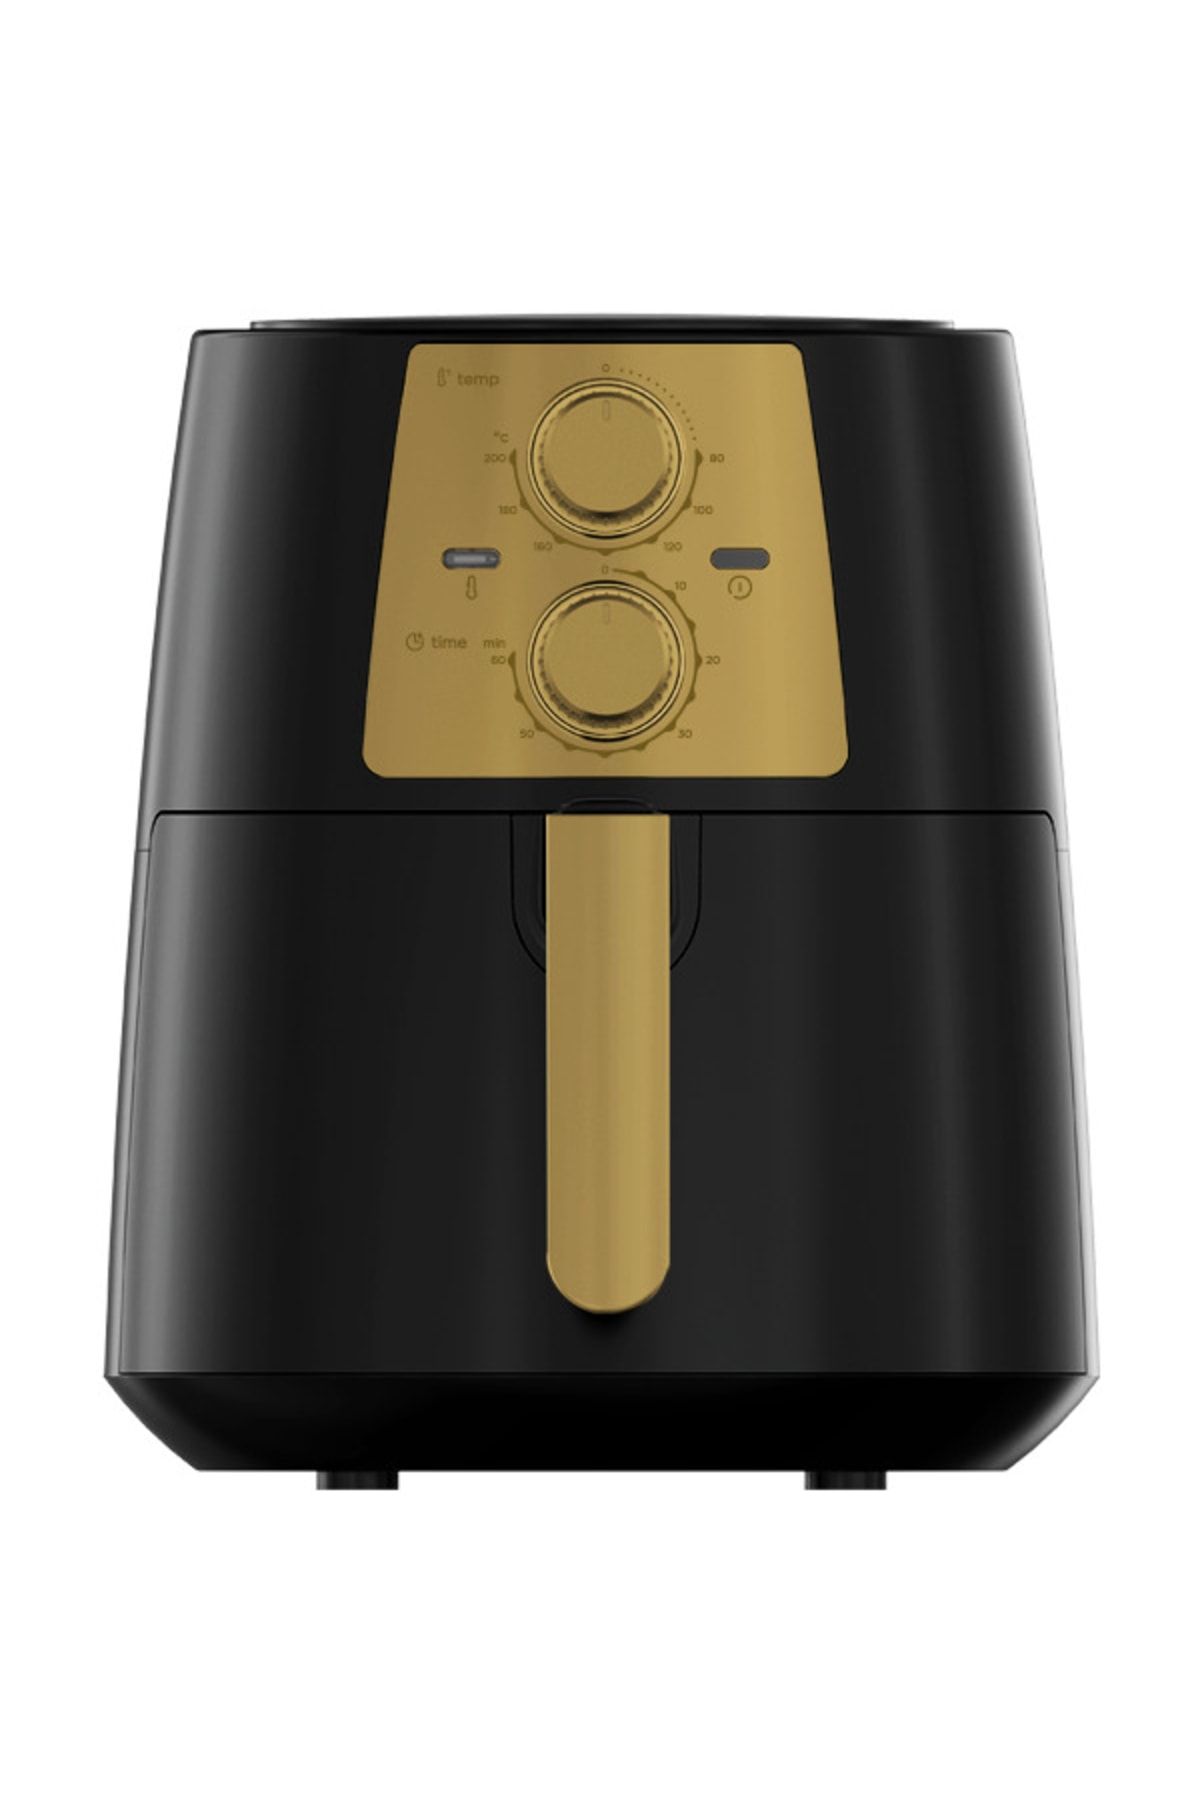 Luxell Fast Fryer Xl Fritöz Black Gold Fc5937 Air Fryer Fastcook Colour Series